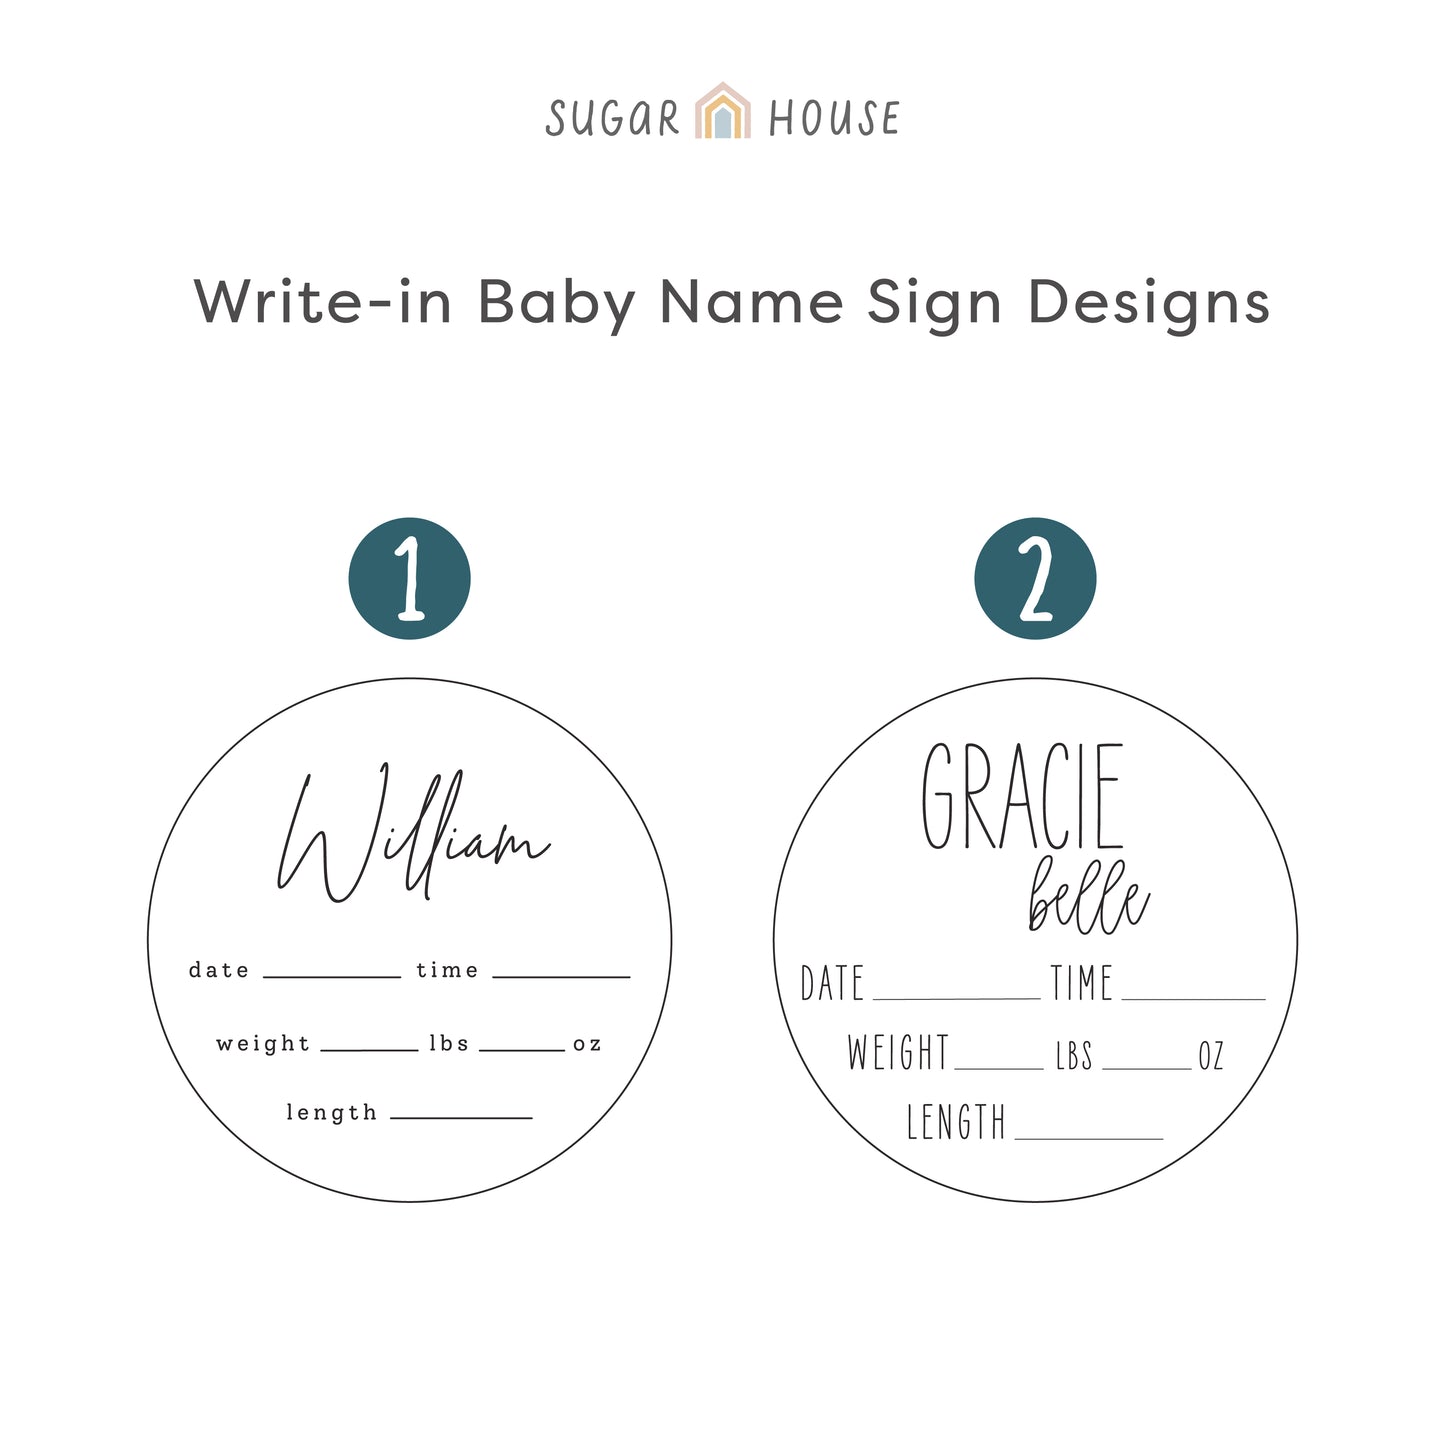 Write-in Birth Stats Sign